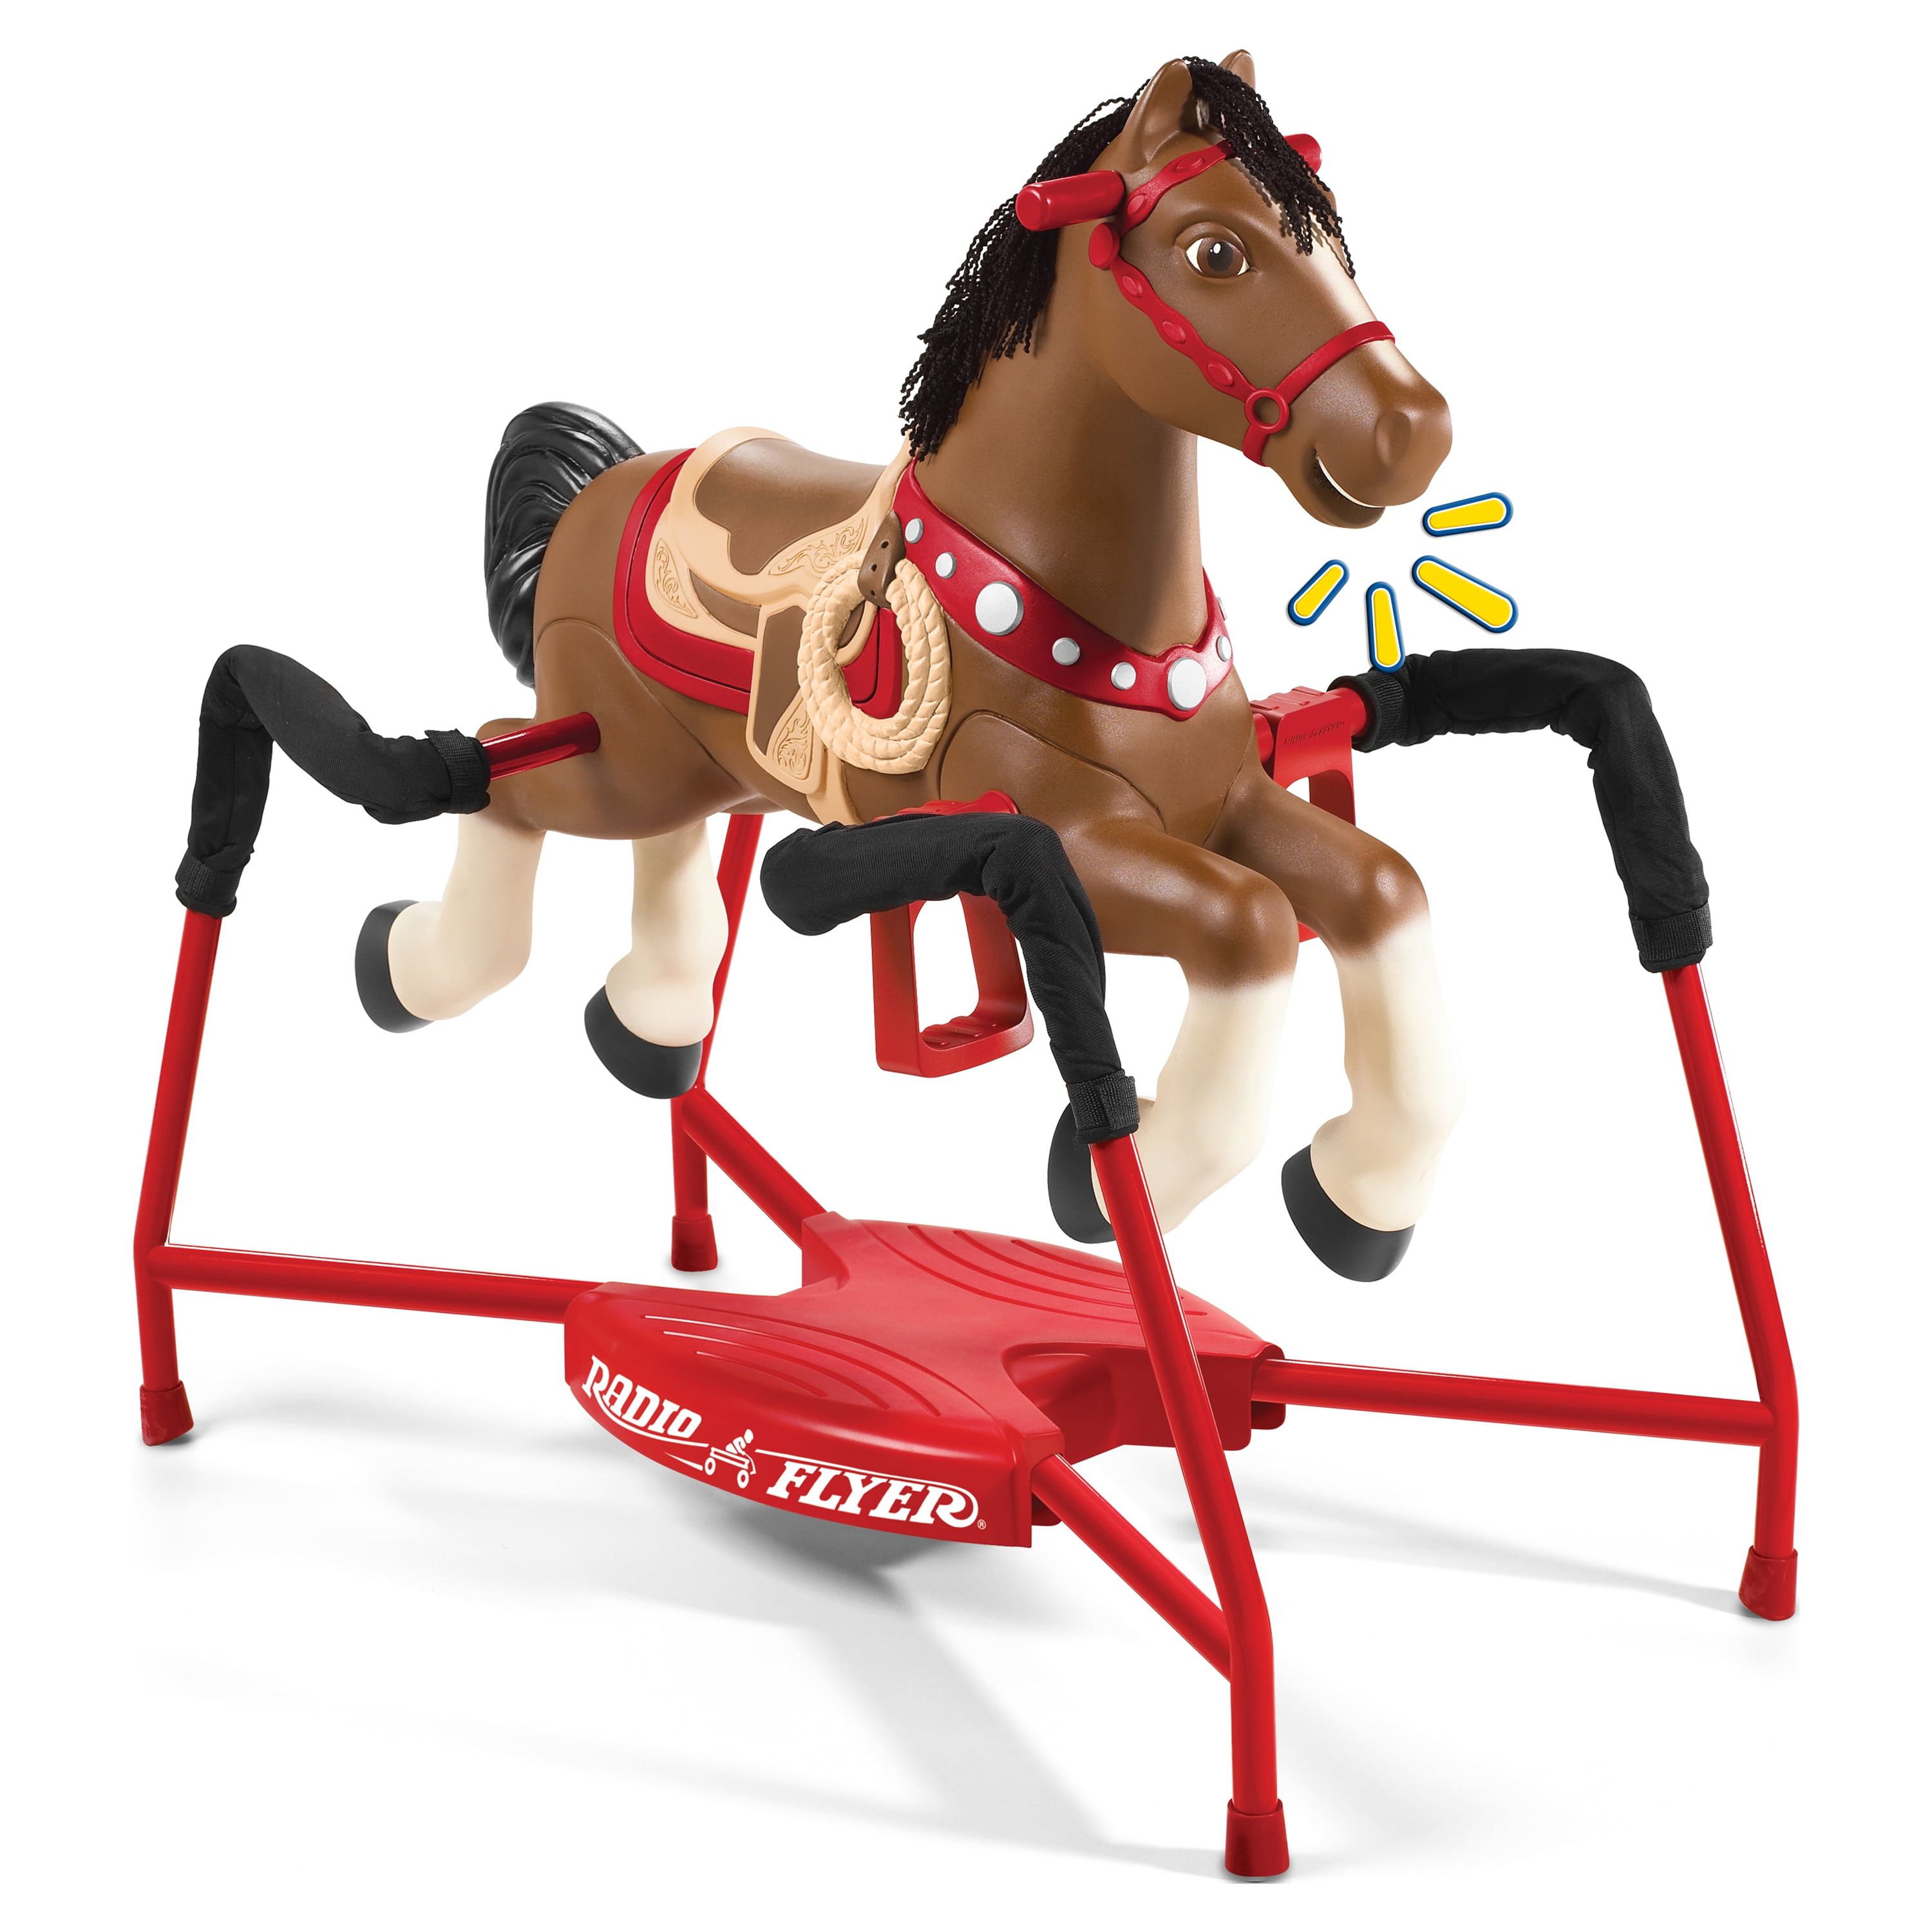 Radio Flyer, Blaze Interactive Spring Horse, Ride-on with Sounds for Boys and Girls - image 3 of 12